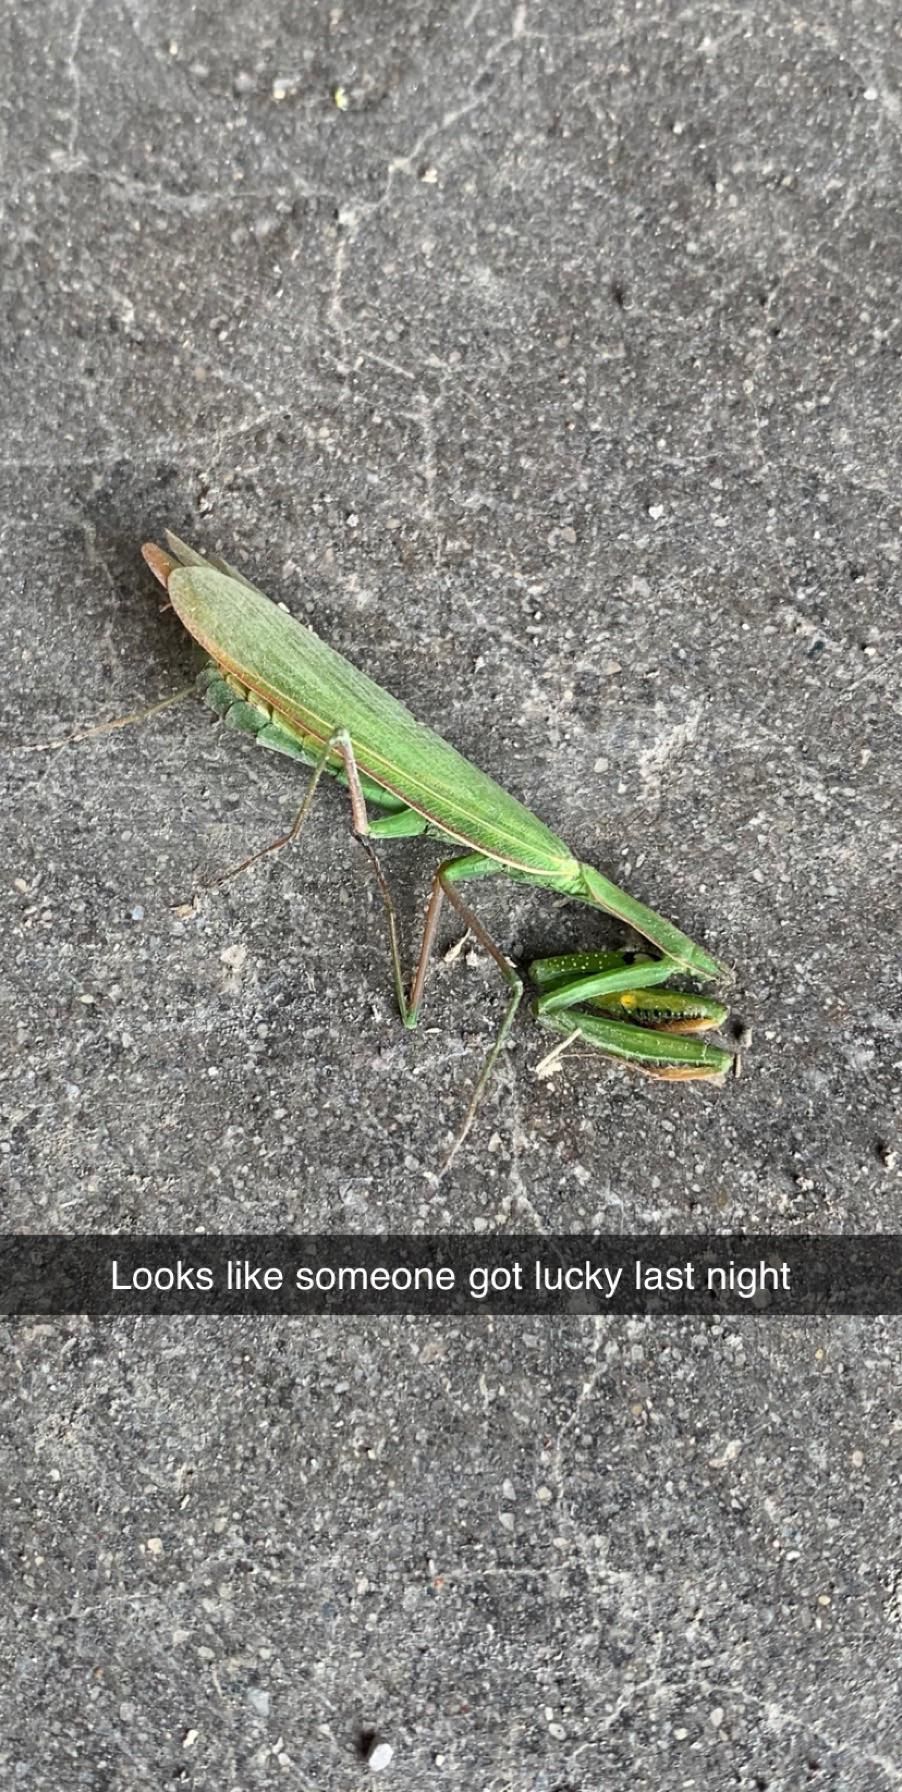 Even these ugly ass bugs are getting more action than me